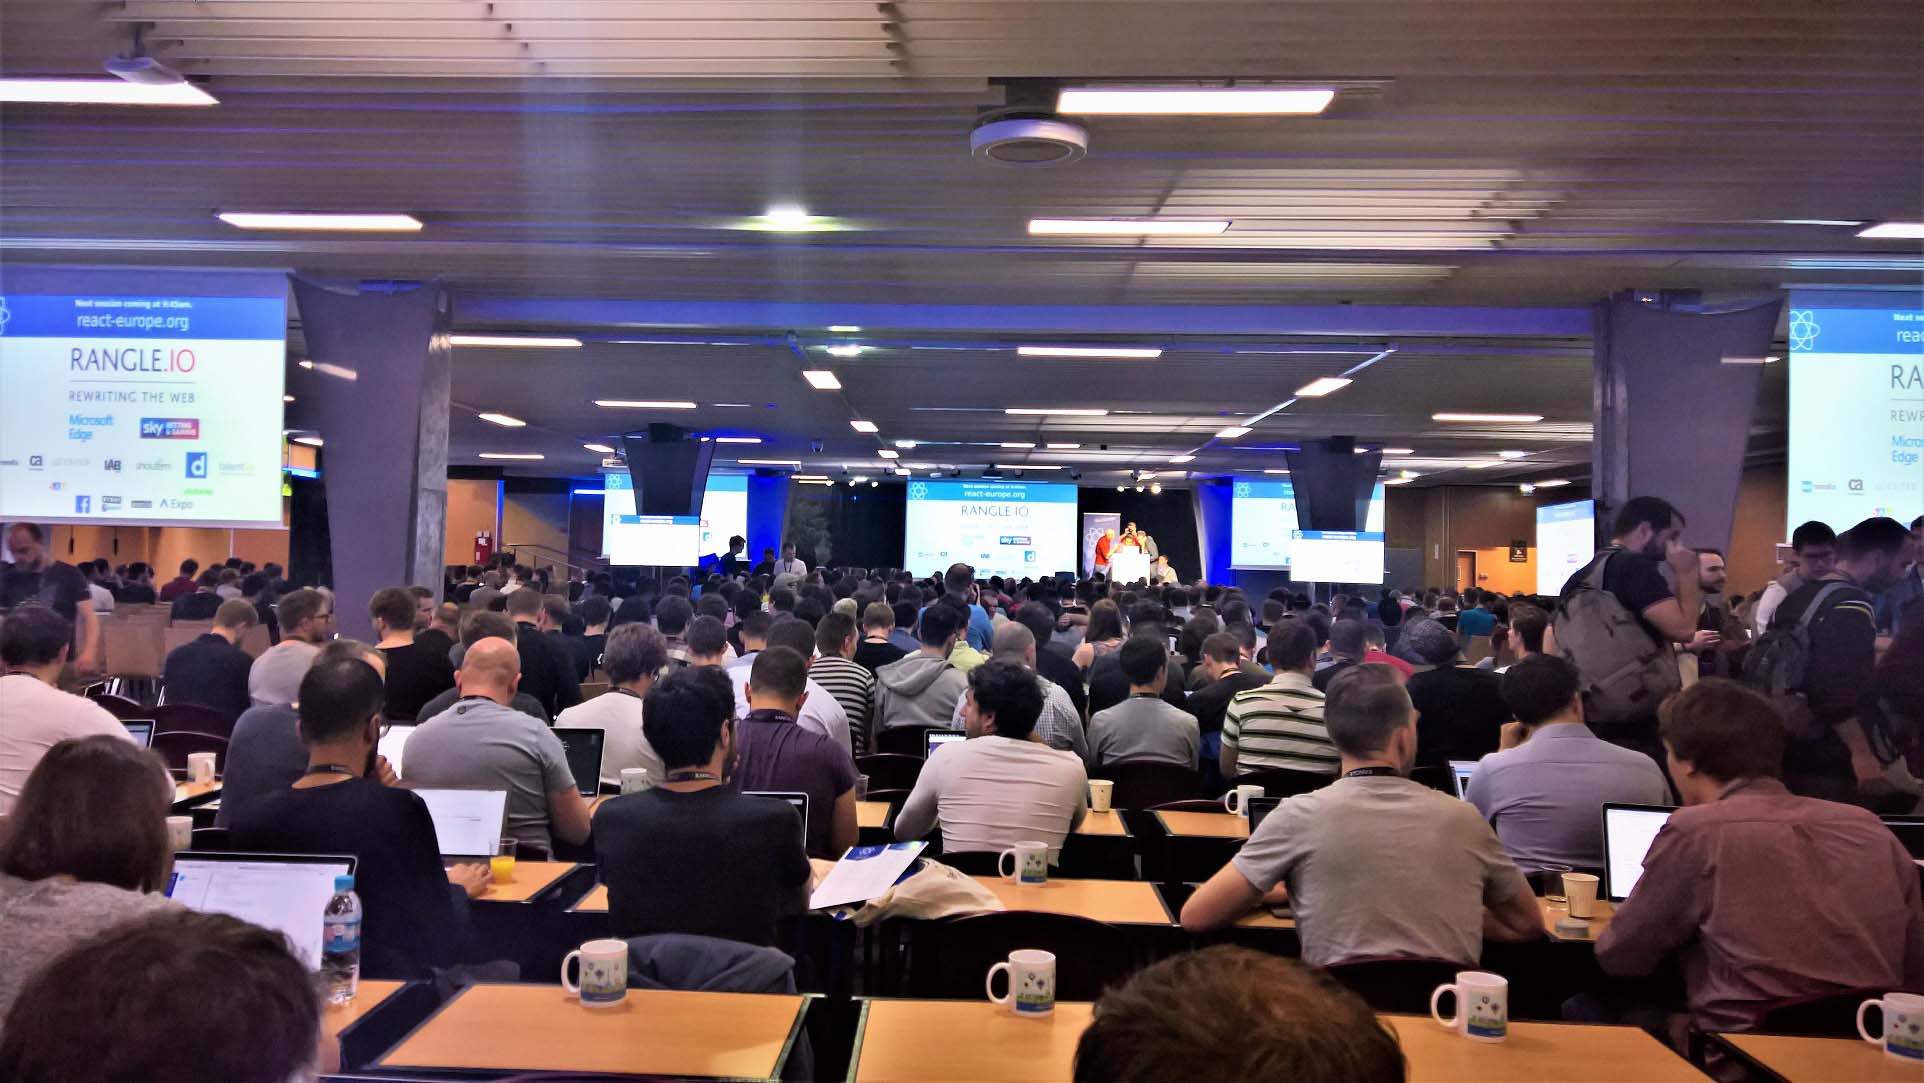 The conference hall, full to bursting with developers waiting for Andrew Clark's keynote to start...